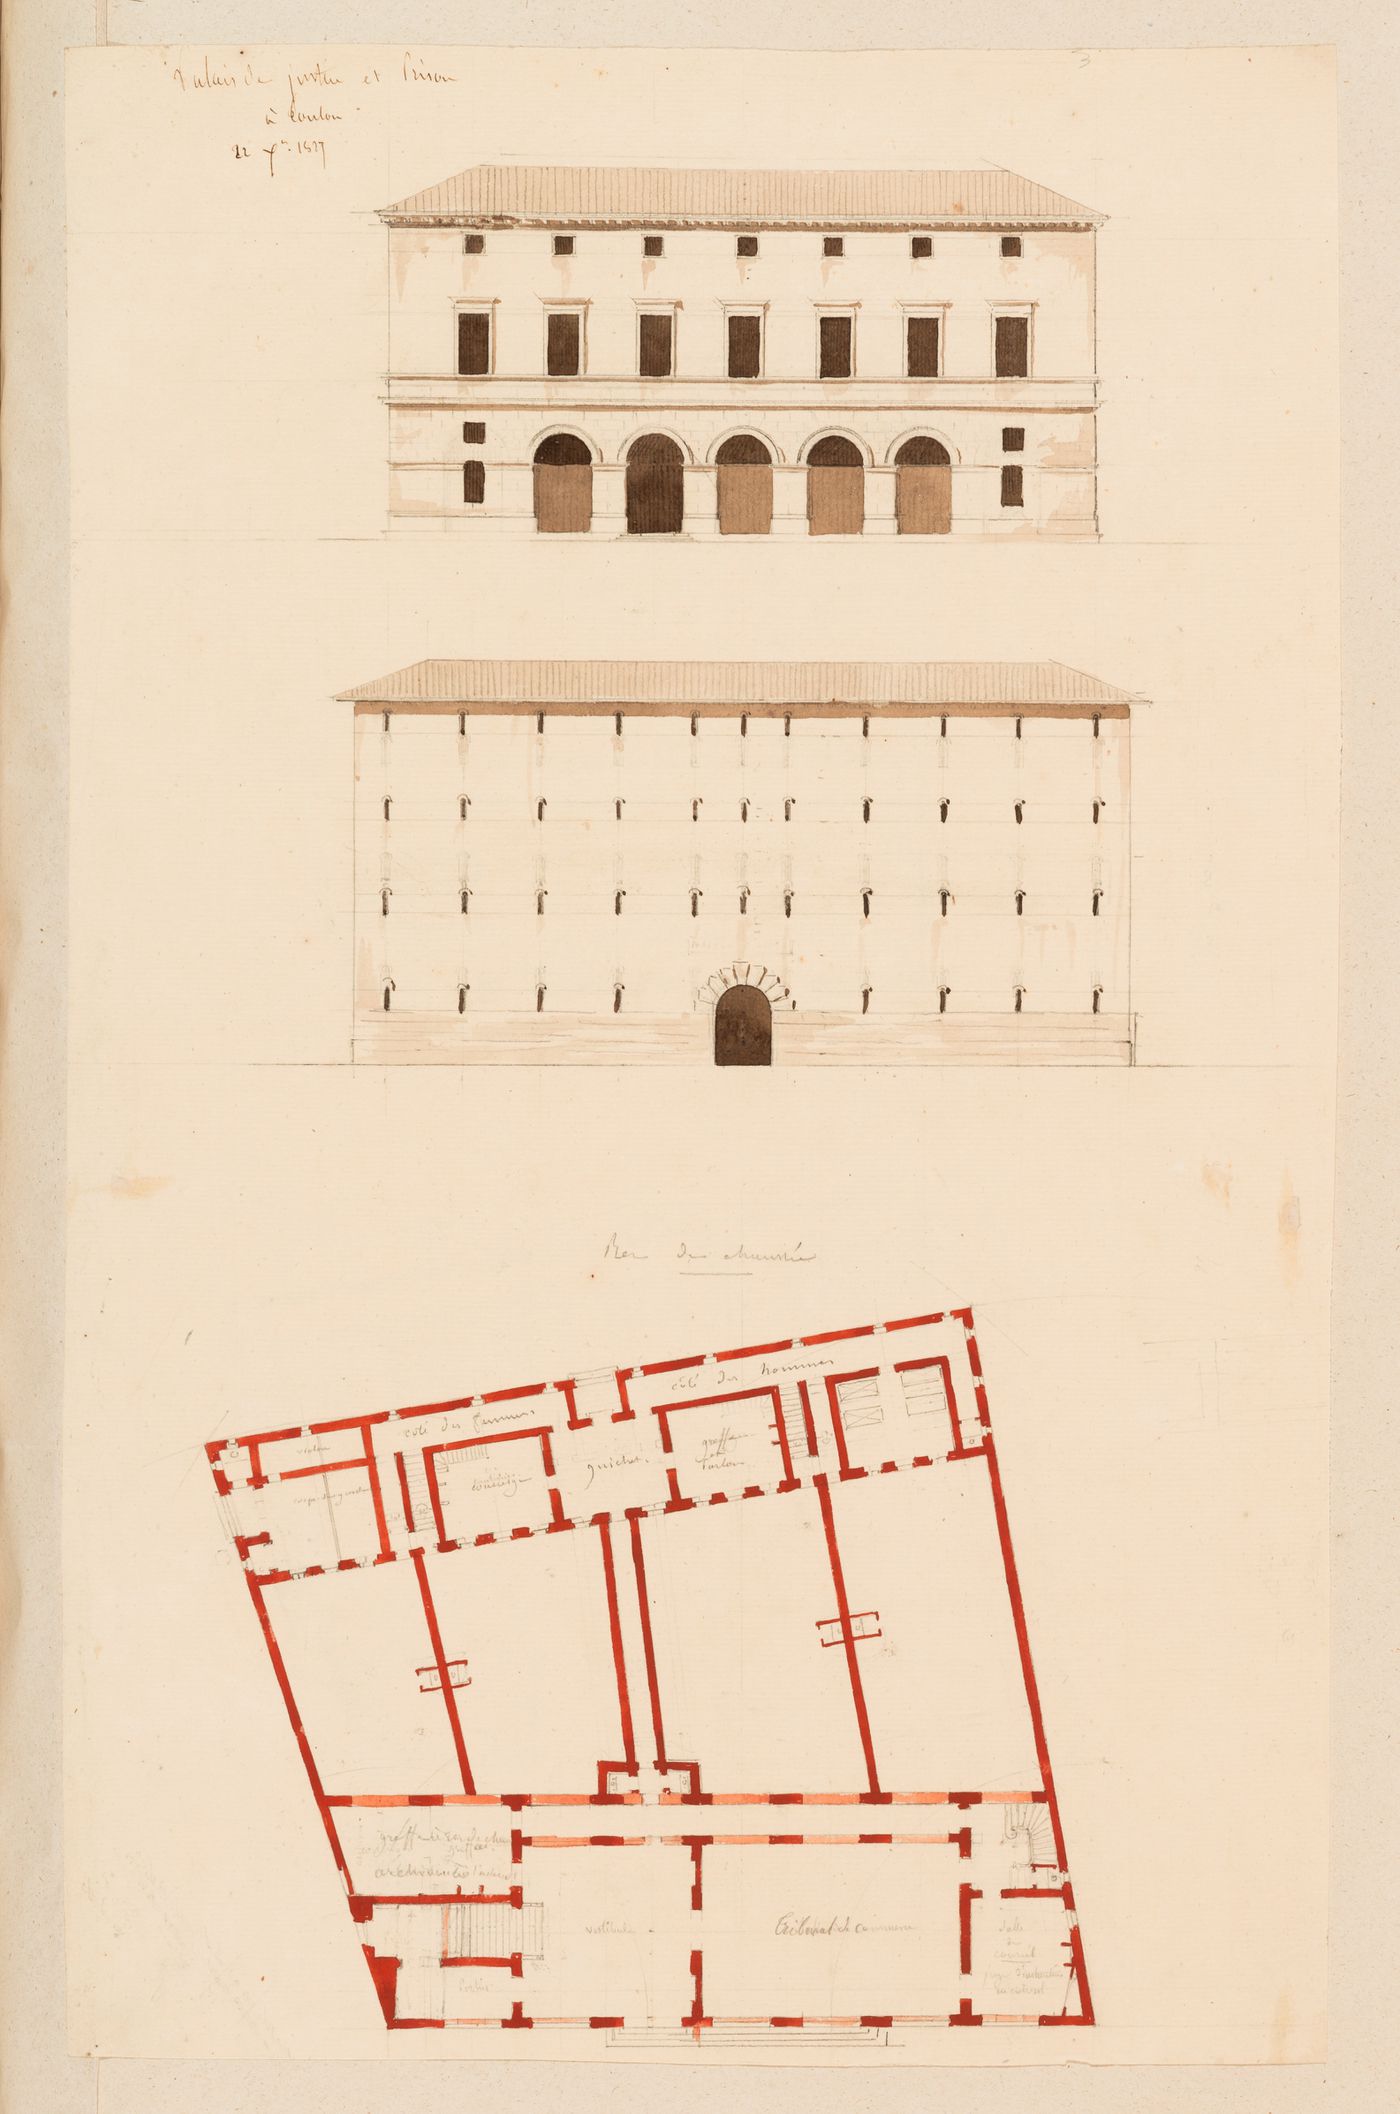 Palais de justice and prison, Toulon, France: Elevations and plan of the ground floor